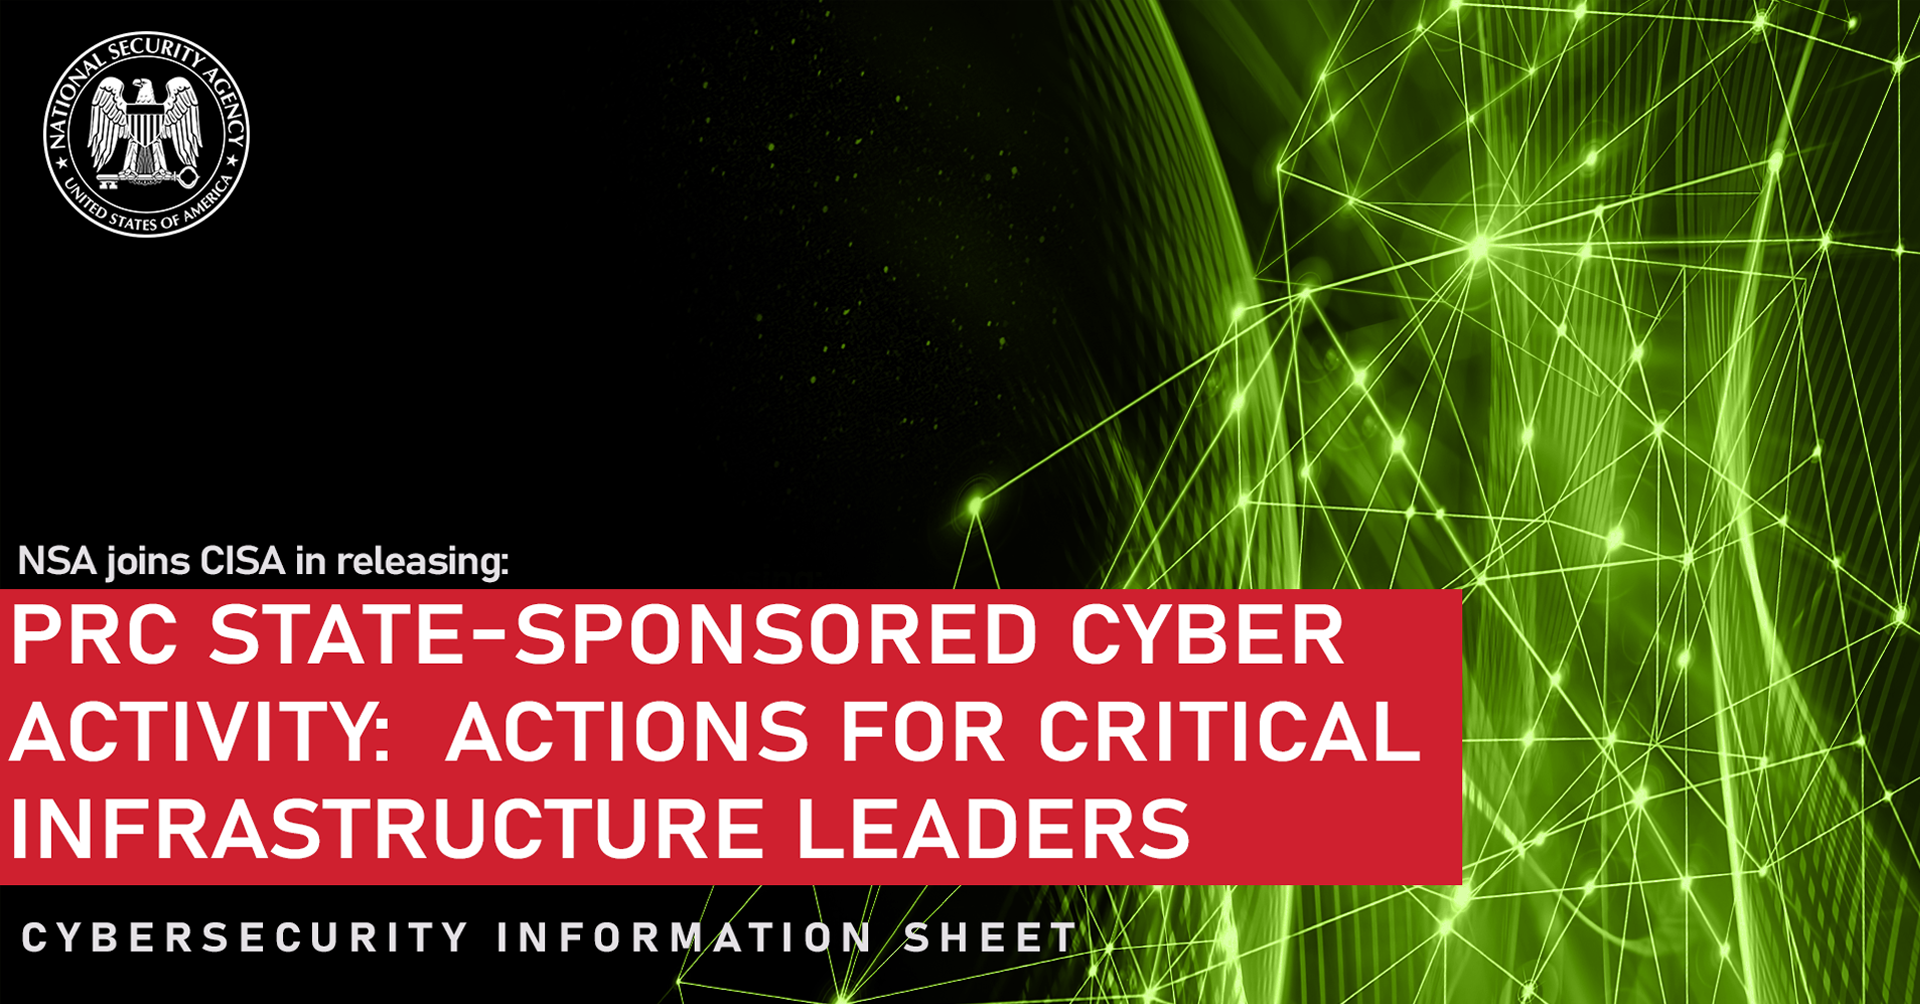  PRC State-Sponsored Cyber Activity: Actions for Critical Infrastructure Leaders